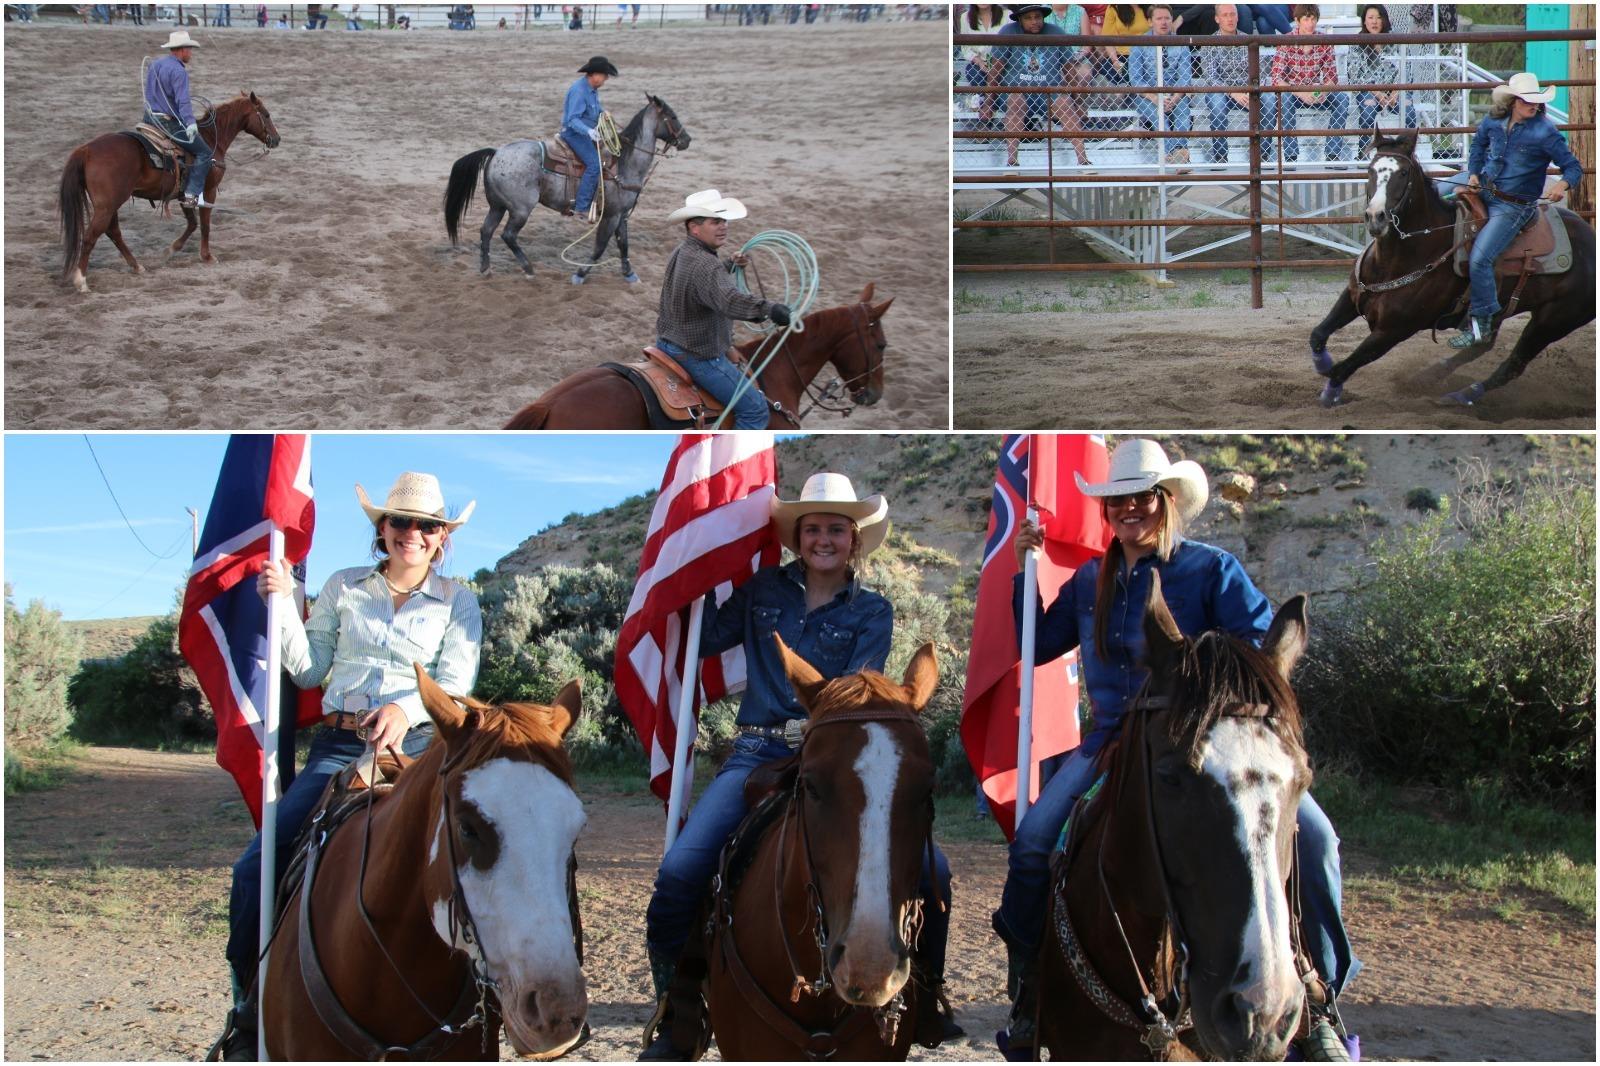 One of the best things to do in Wyoming is see a rodeo!